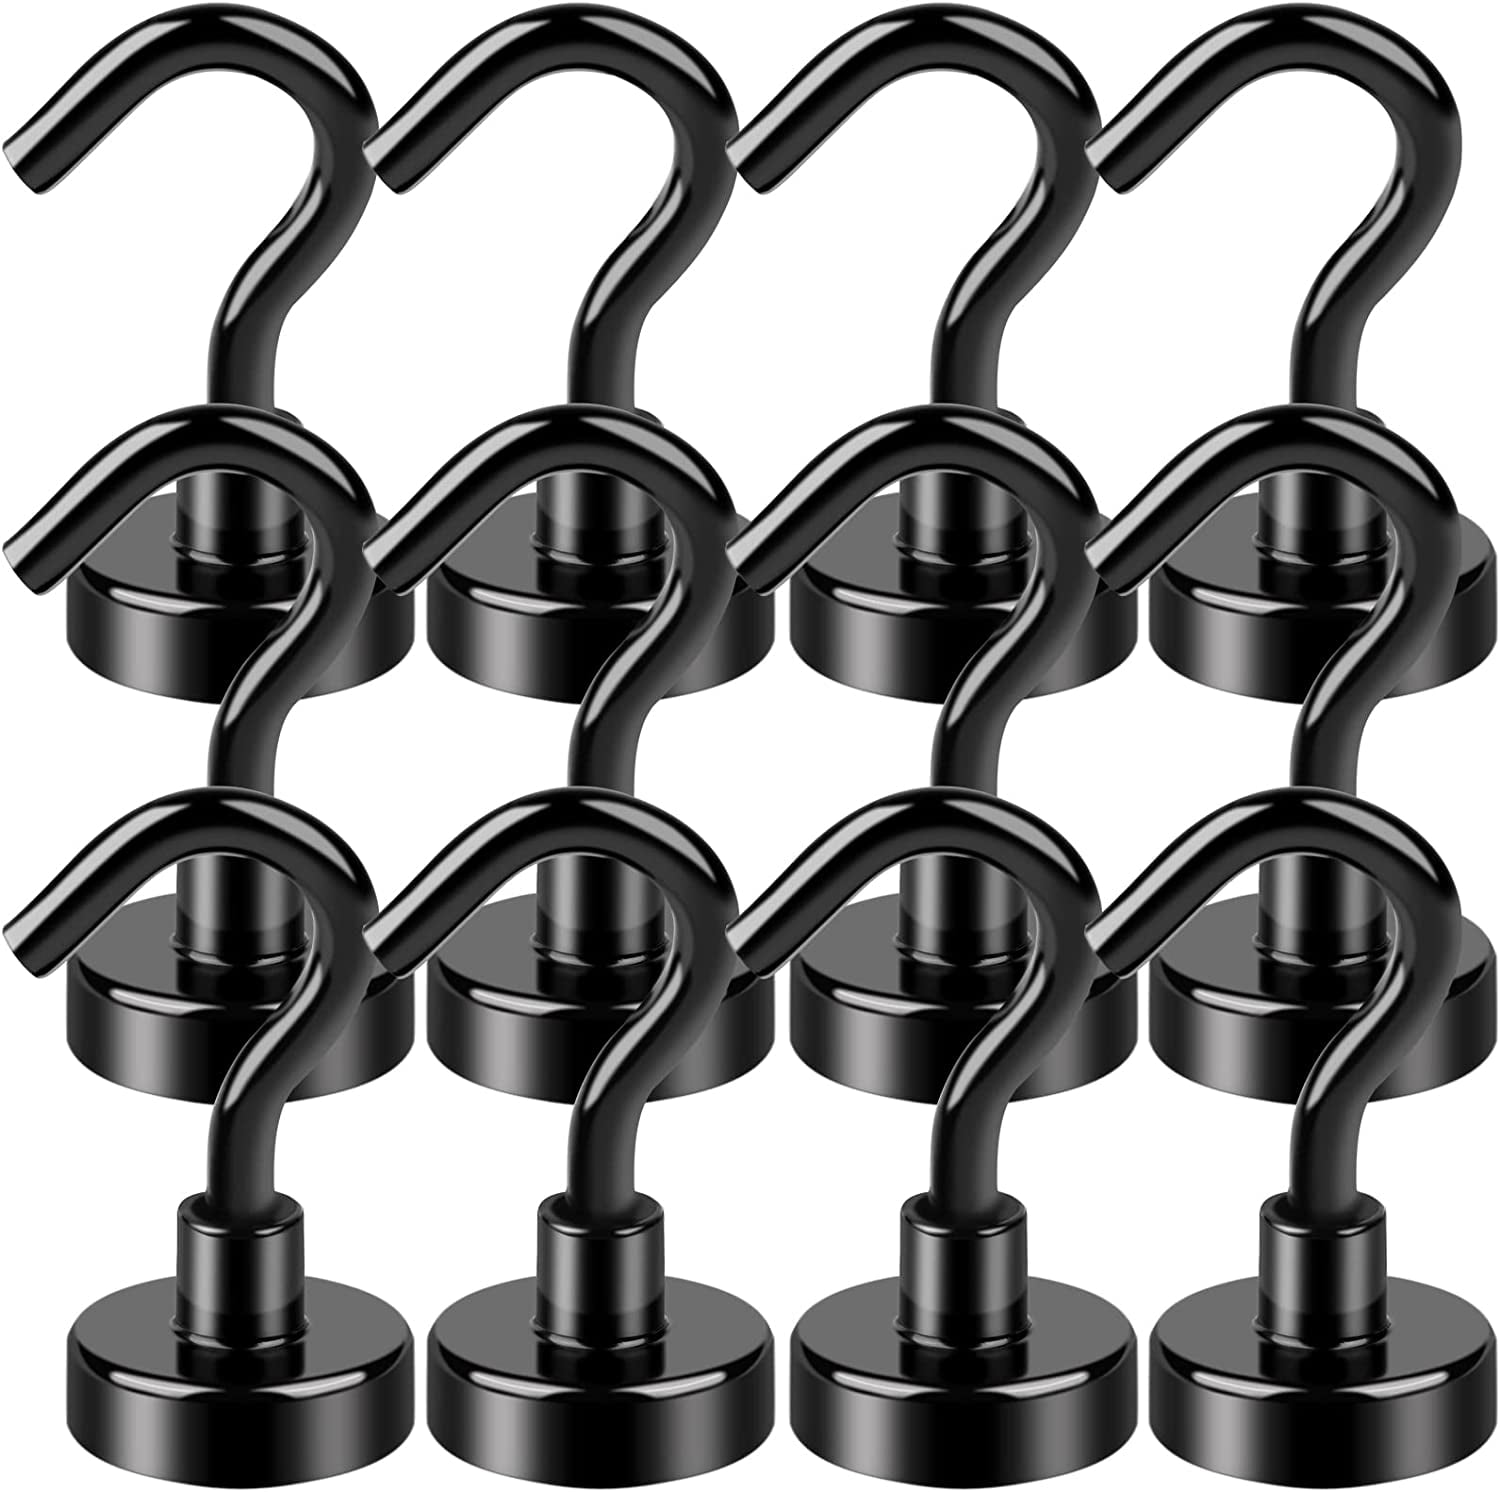 20Pcs Powerful Magnetic Hooks Portable Super Strong Fishing Magnets Wall  Hanging Heavy Duty Magnetic Hook For Kitchen Storehouse